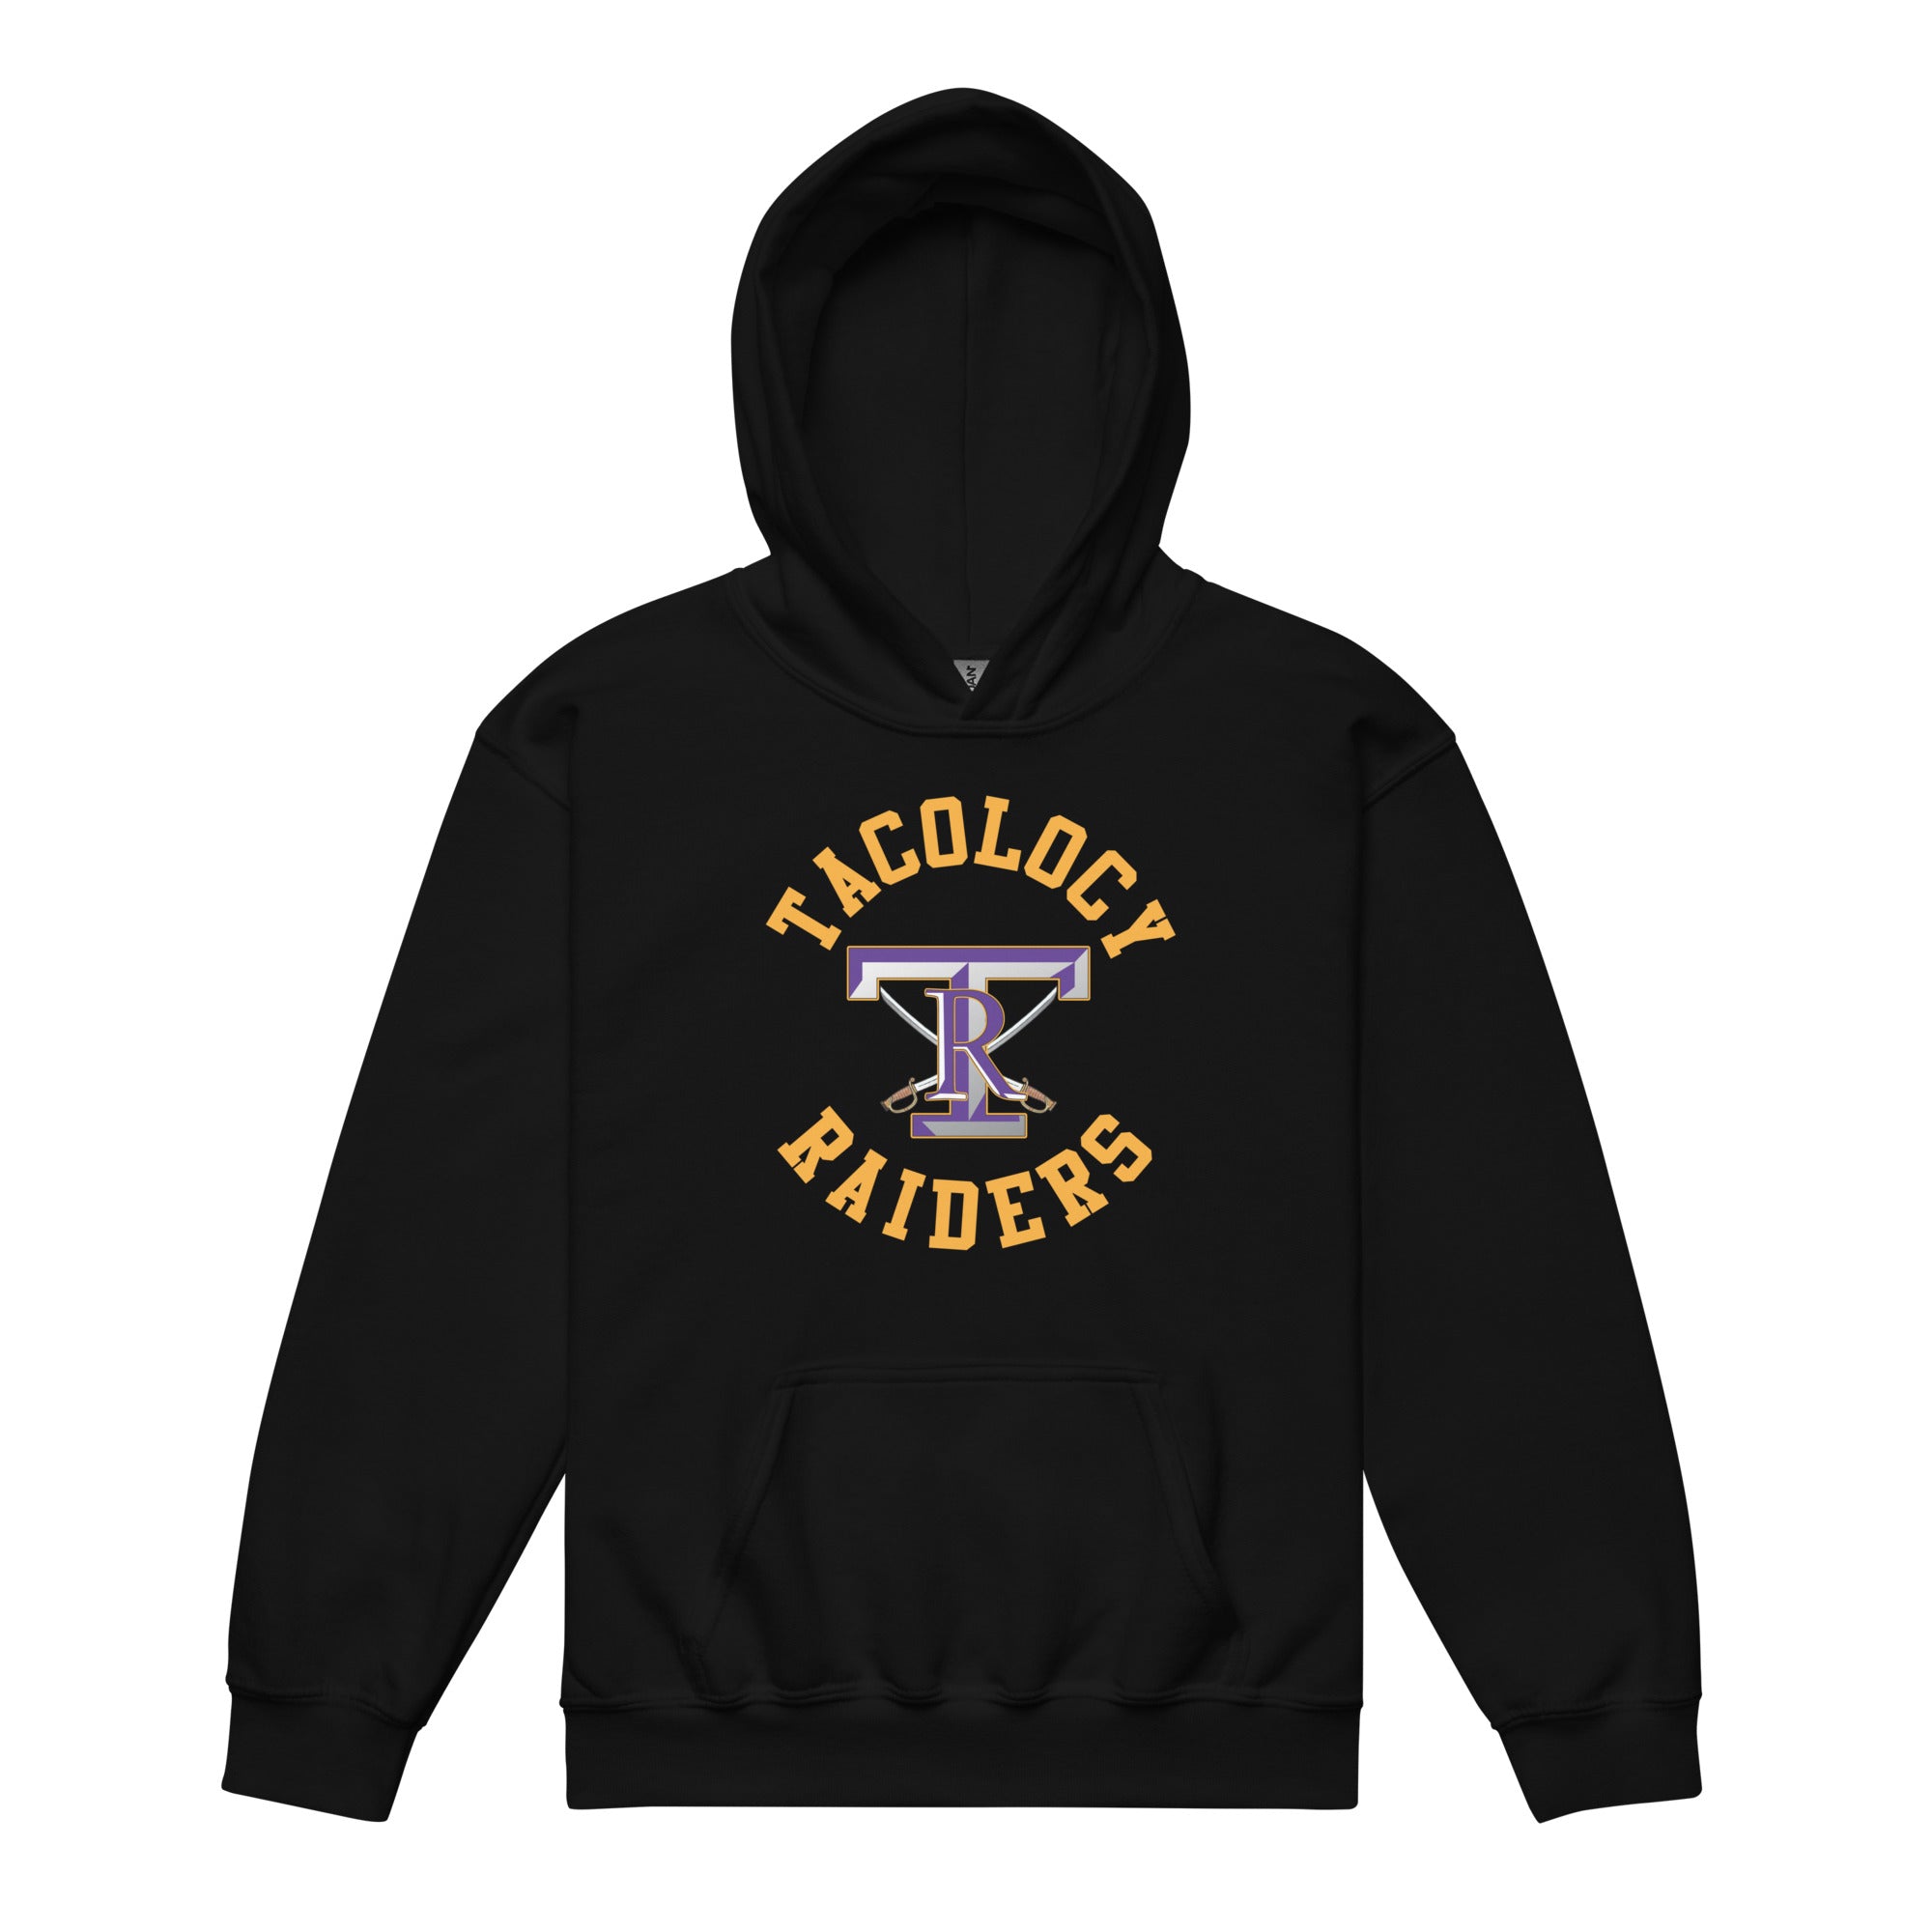 Tacolcy Youth heavy blend hoodie